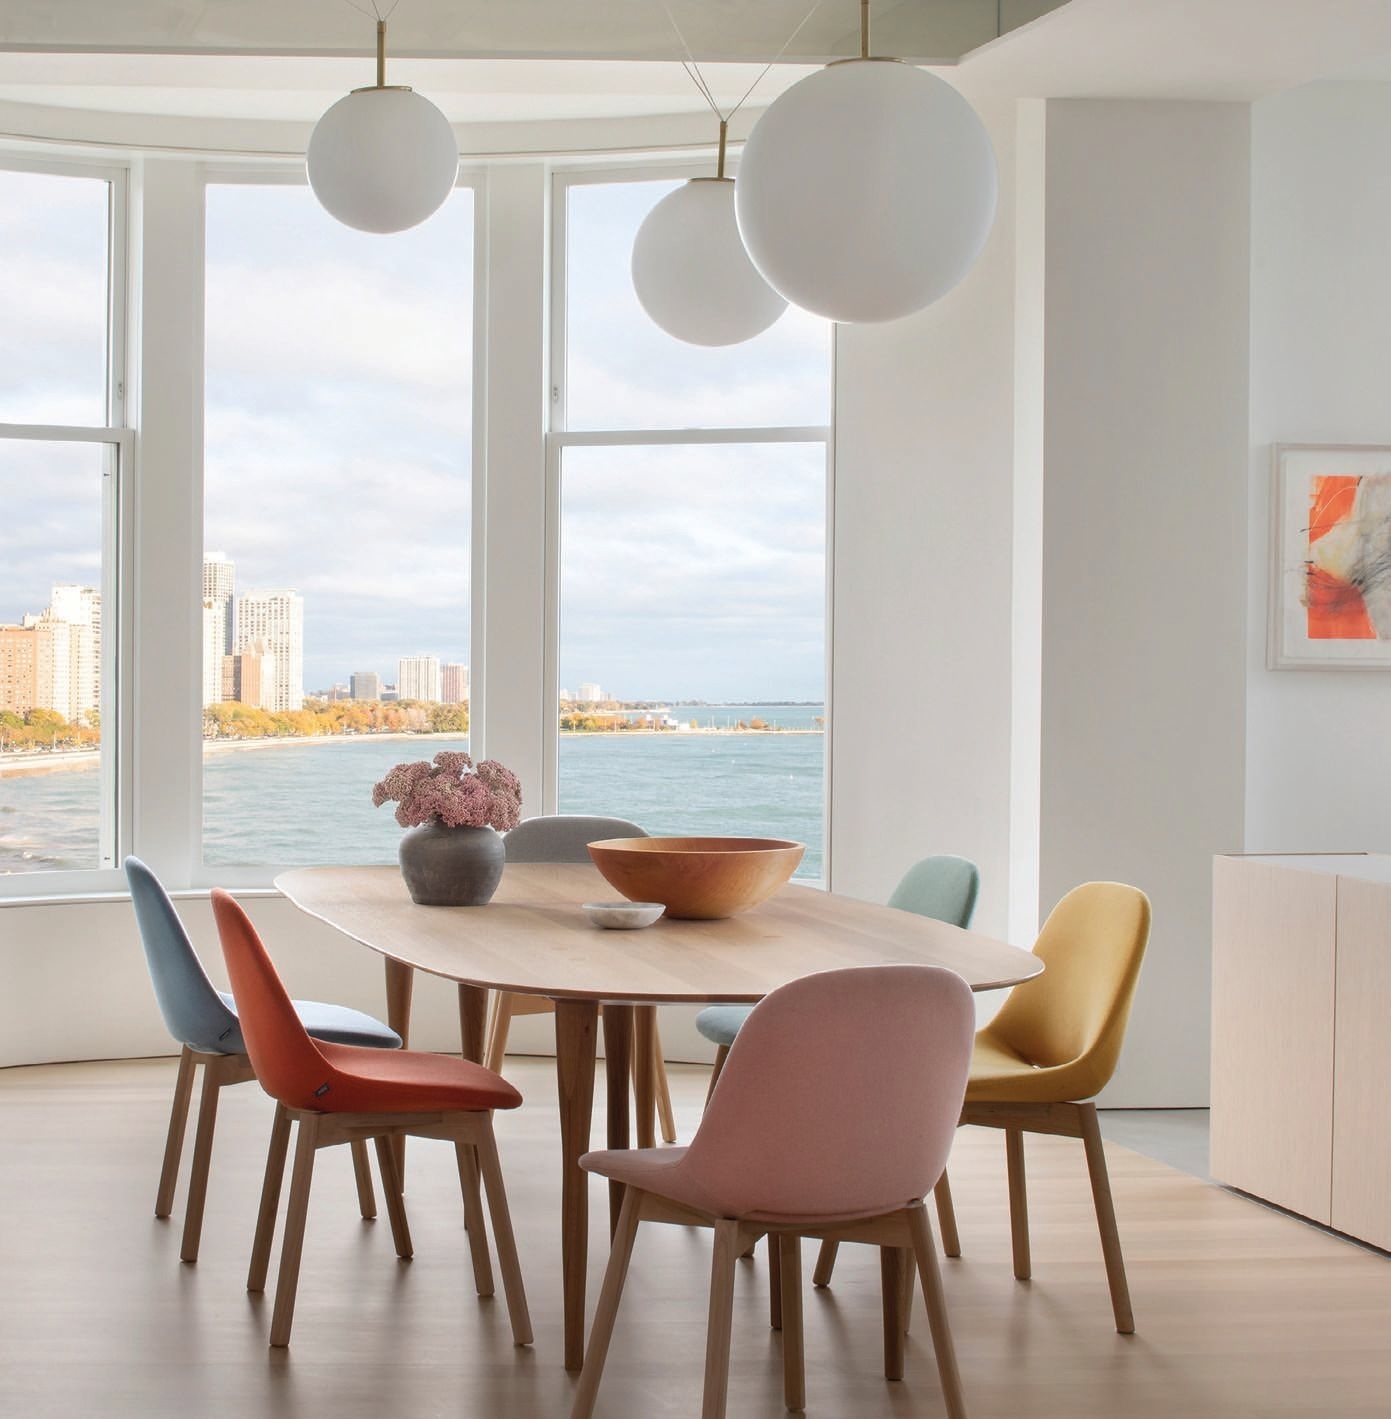 With a custom table fabricated by Peter Chasak, Artifort Beso chairs by Interni and the Pallatre three-light suspension chandelier by Vesoi from Lightology, the modern, minimalist dining room allows the sweeping Lake Michigan views to shine. Photographed by Gibeon Photography